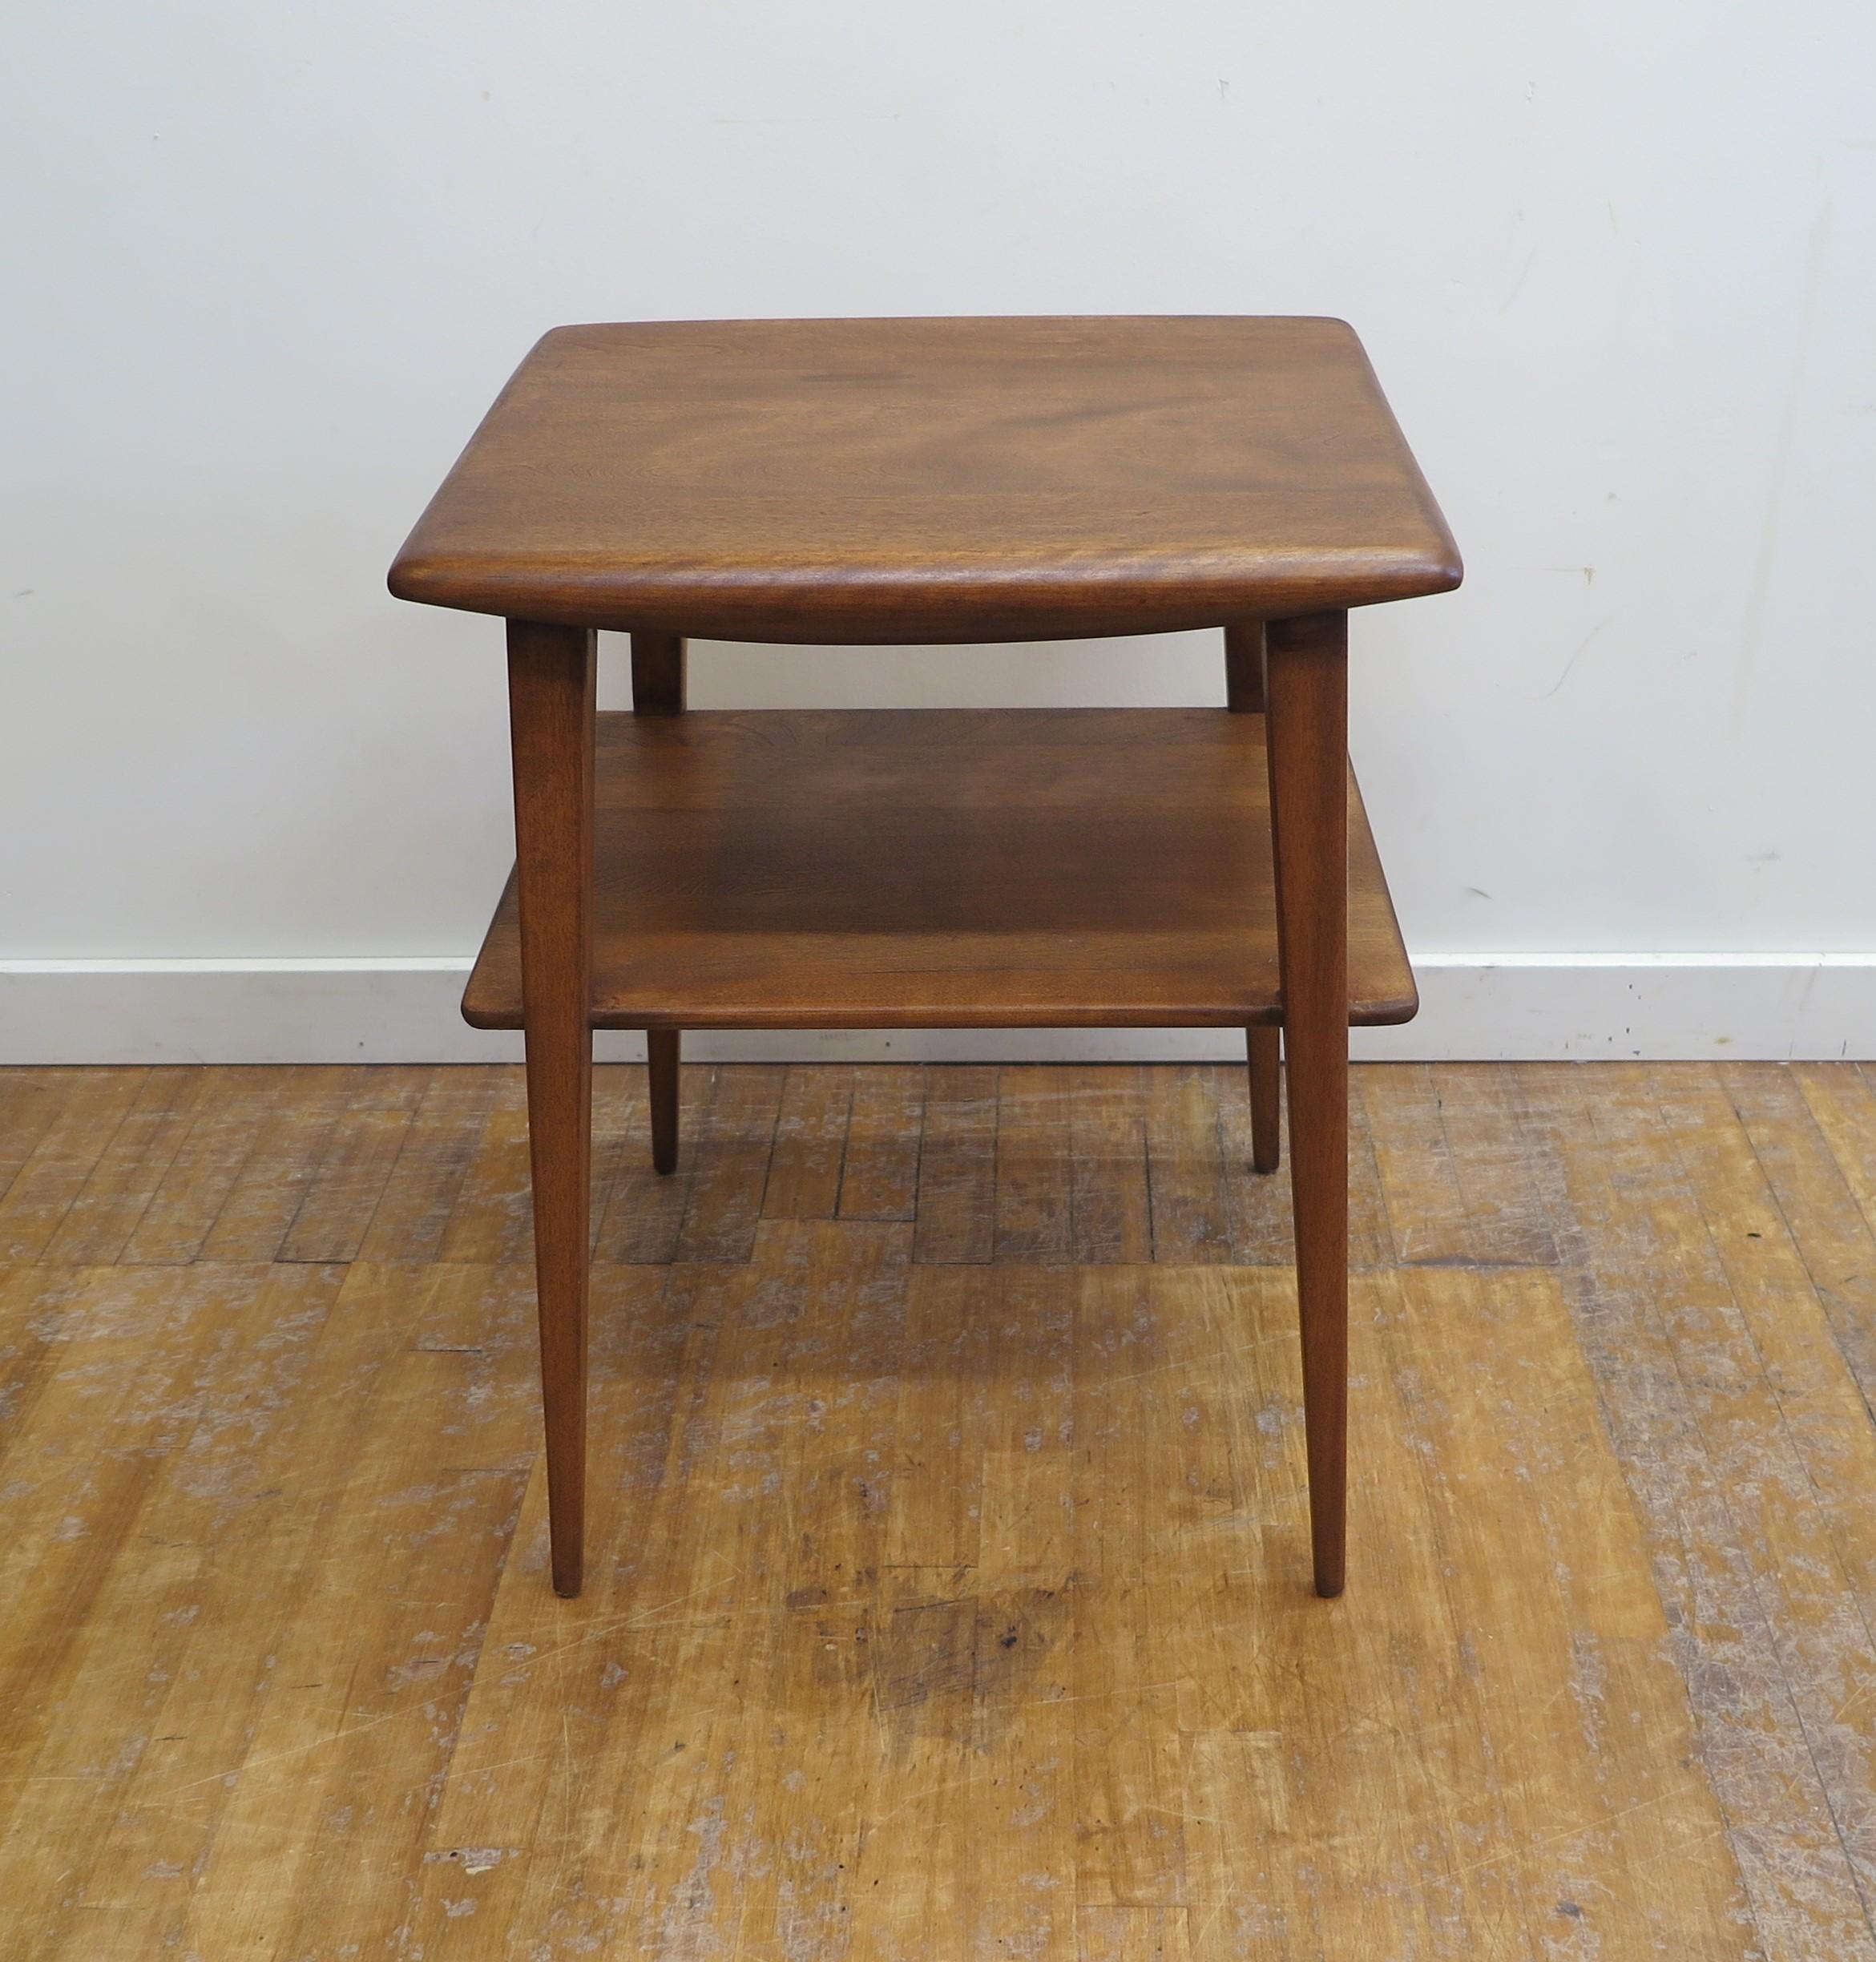 Mid-Century Modern Heywood Wakefield side table. Sculpted top with rounded edges having two shelves supported on tapered splayed legs. Timeless design solid maple in very good condition. Heywood Wakefield Trademark to underside. American Mid Century